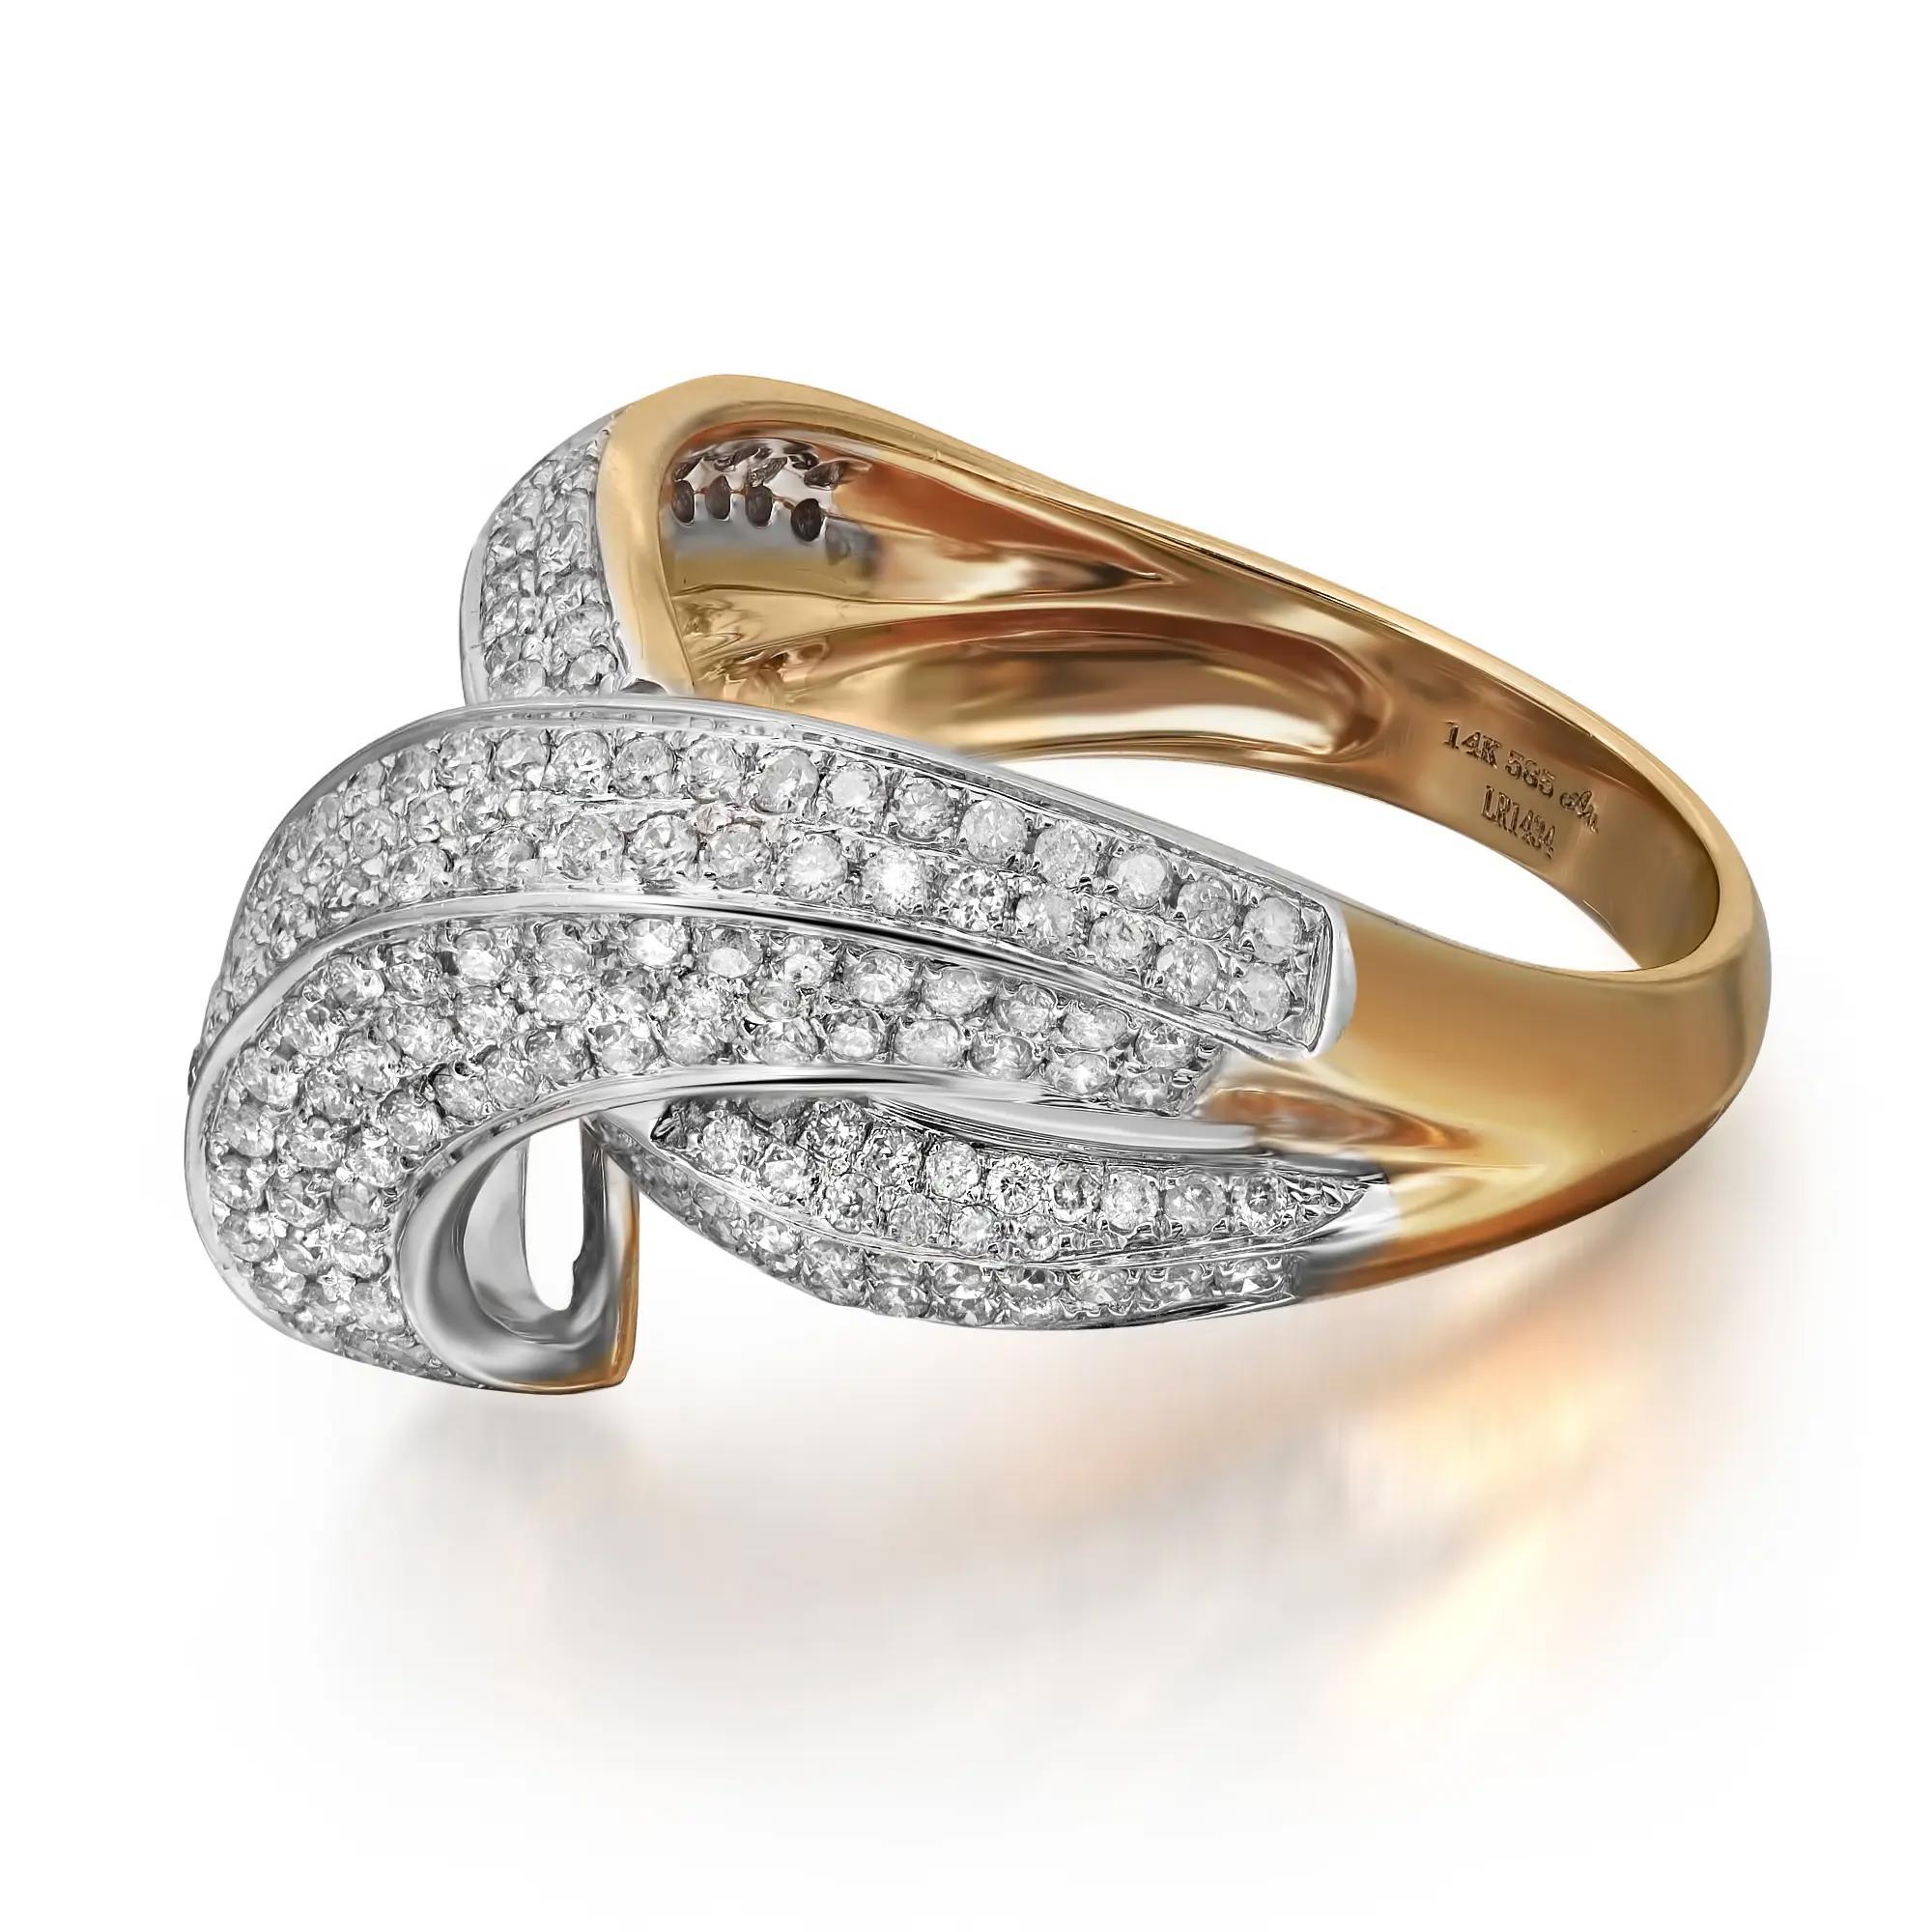 1.18Cttw Pave Set Round Cut Diamond Ladies Cocktail Ring 14K Yellow Gold SZ 7.5 In New Condition For Sale In New York, NY